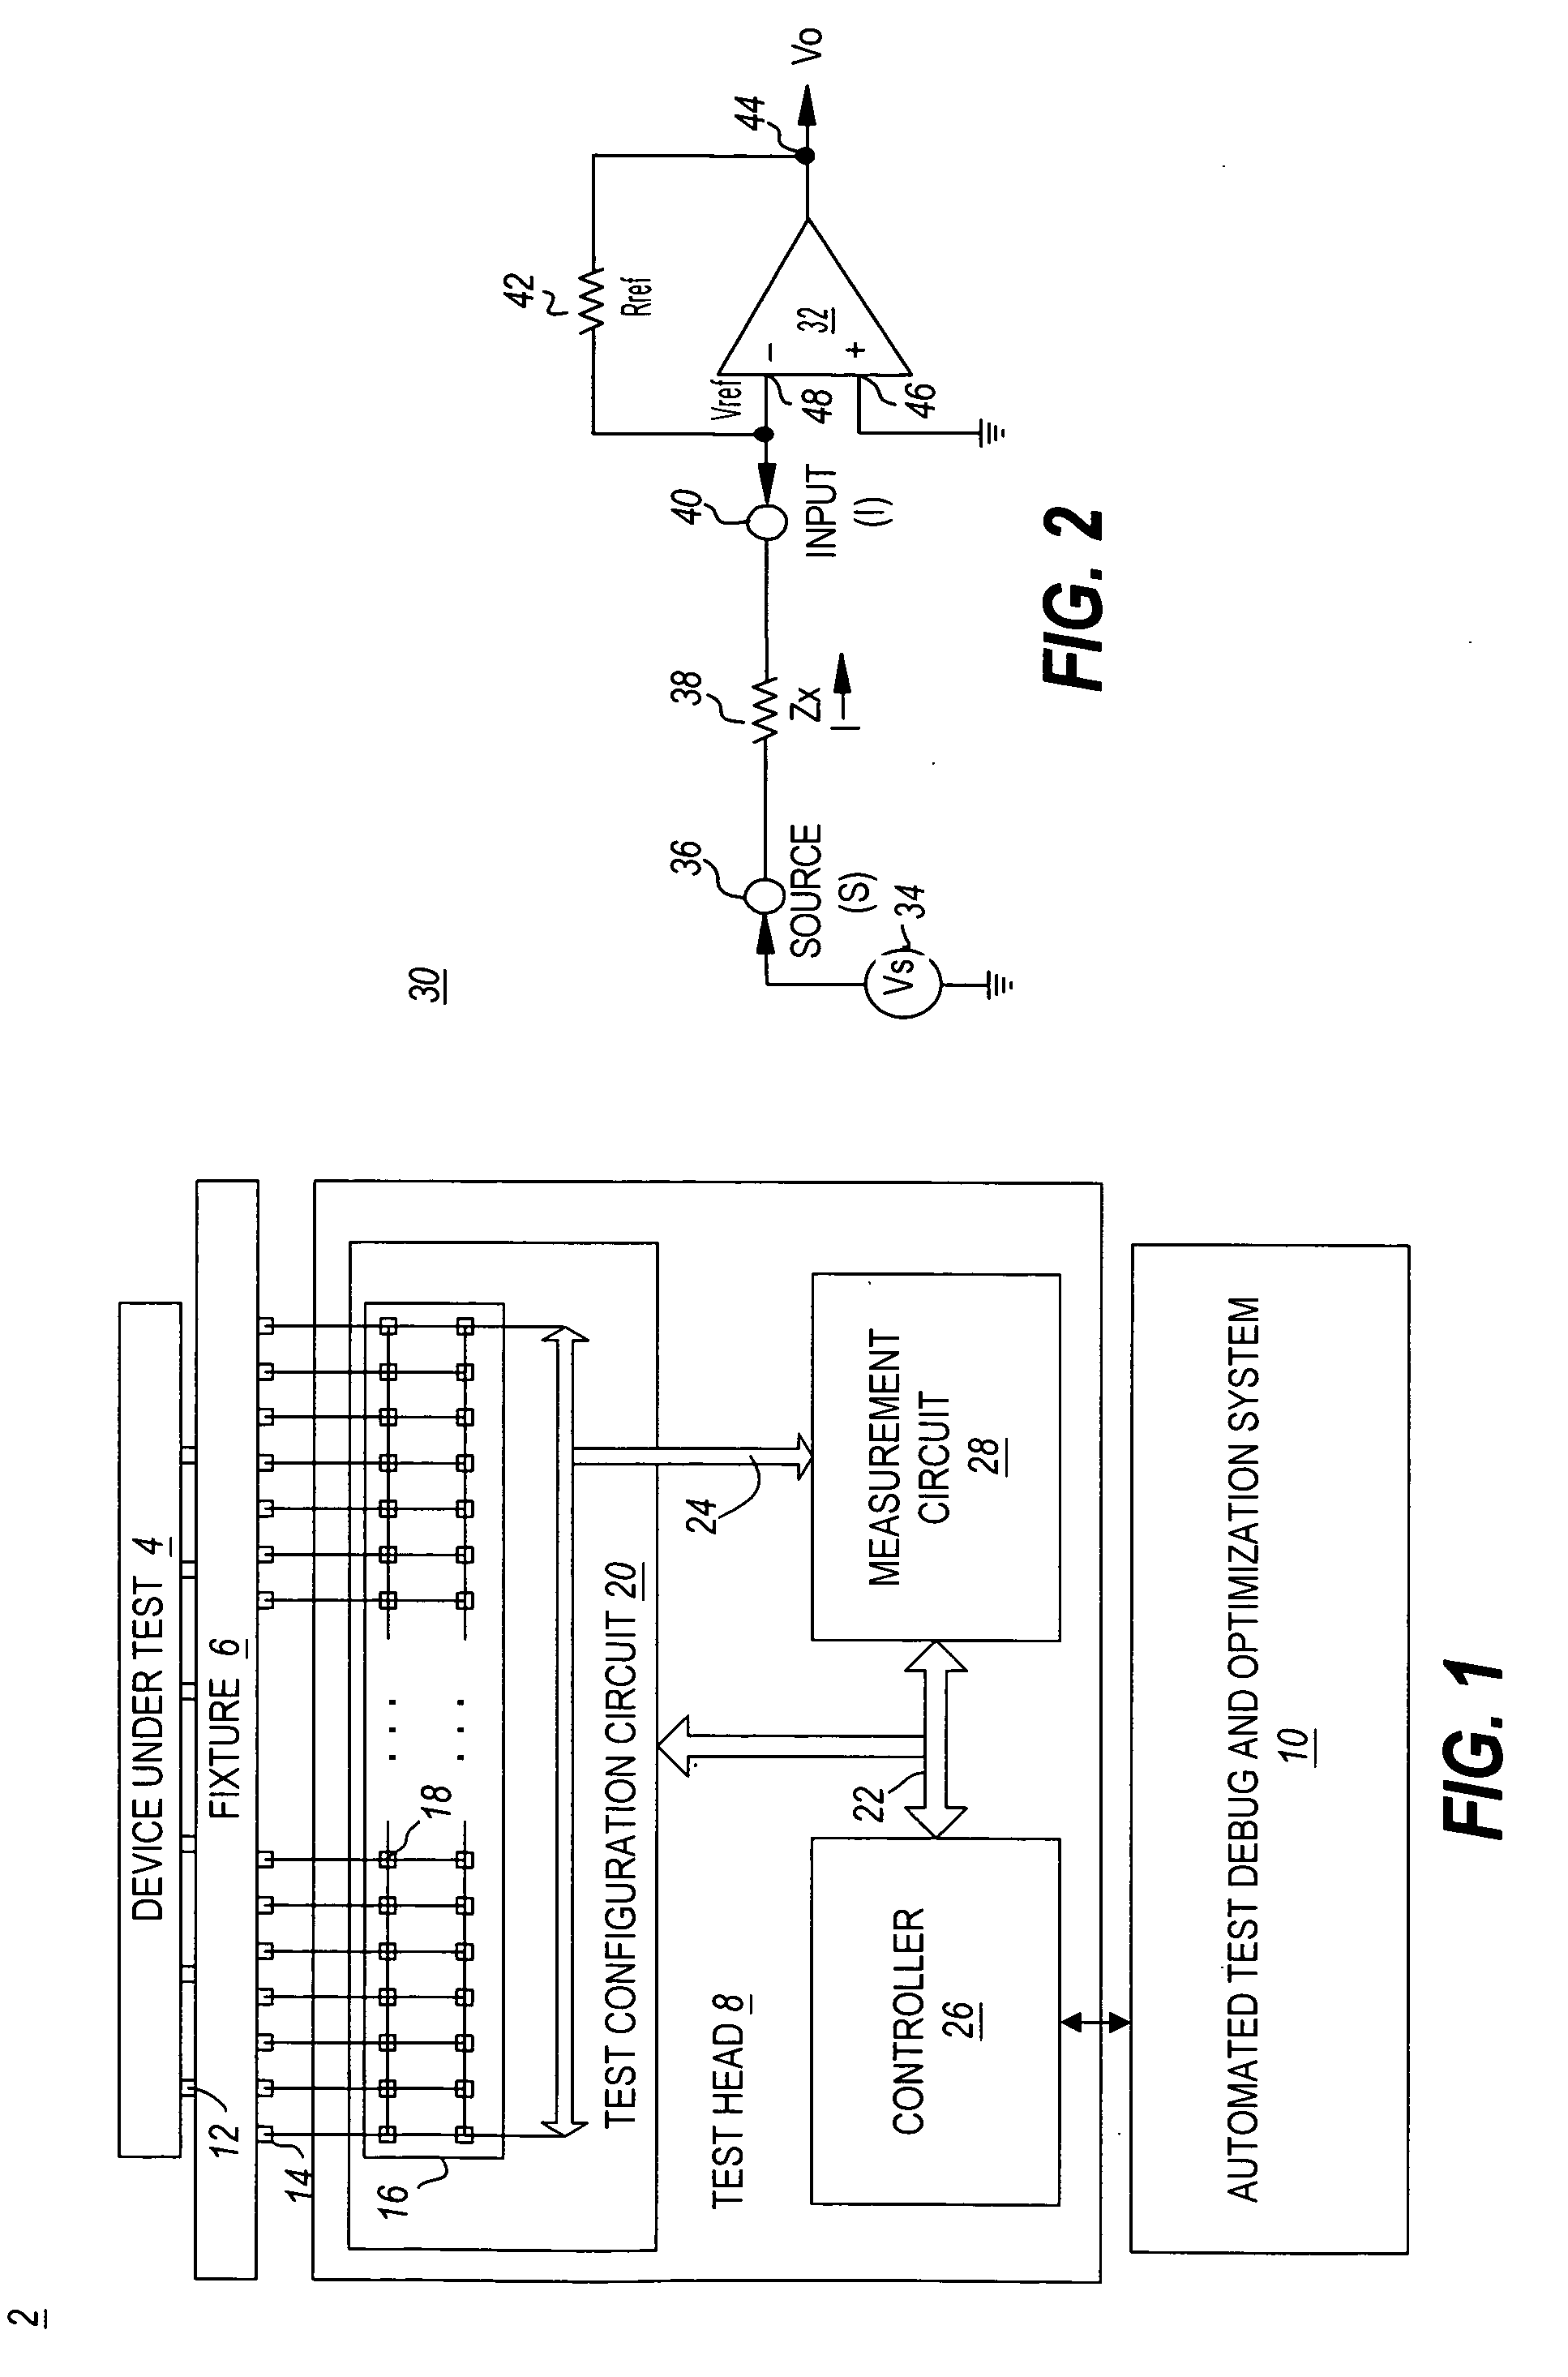 Method and apparatus for automated debug and optimization of in-circuit tests